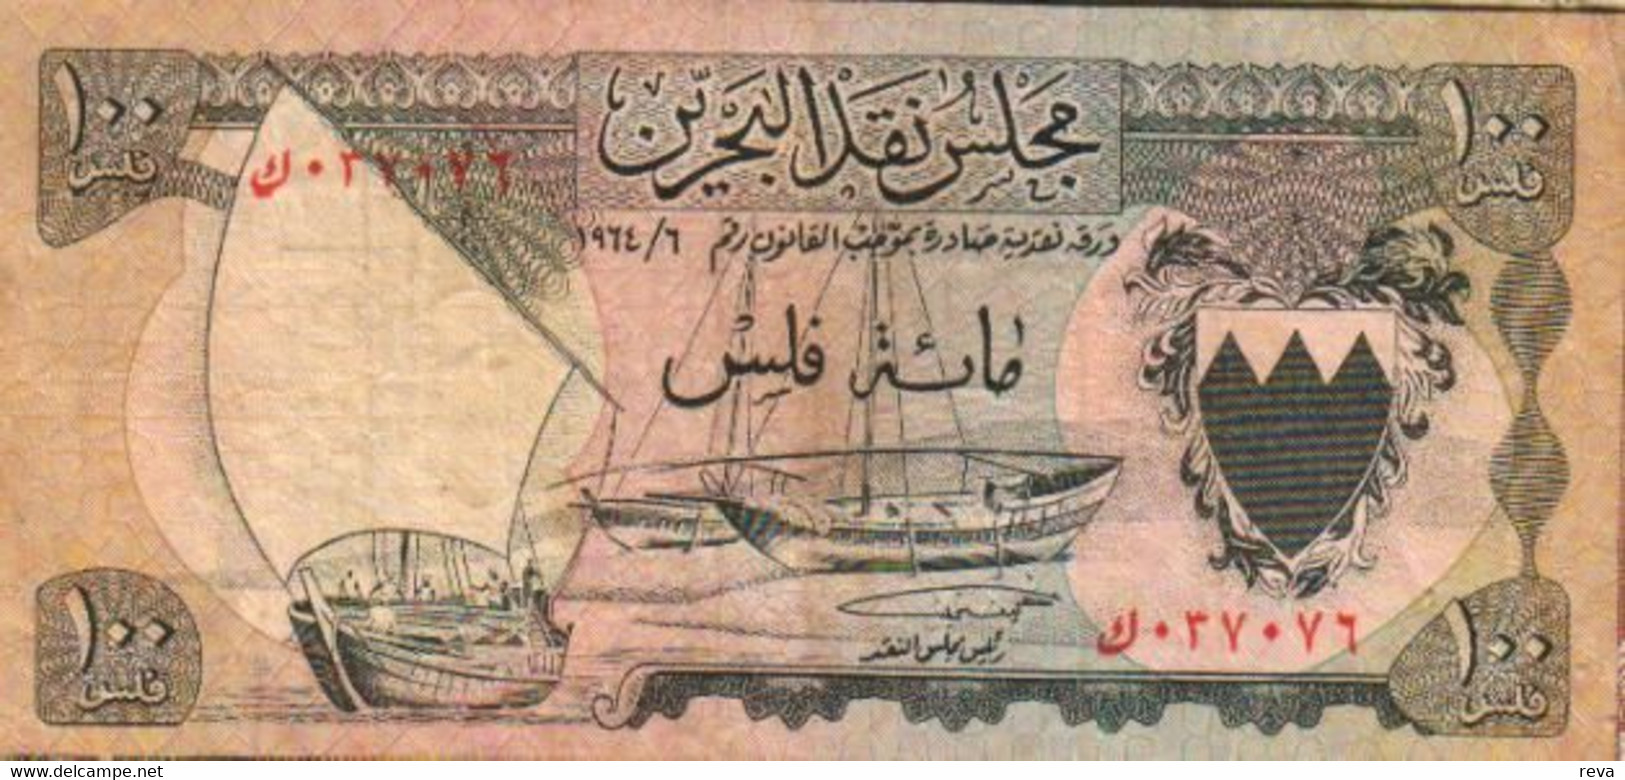 BAHRAIN 100 FILS  BOAT FRONT PALM TREE BACK DATED 1964 VF P.1a 1 YEAR TYPE READ DESCRIPTION CAREFULLY !!! - Bahreïn